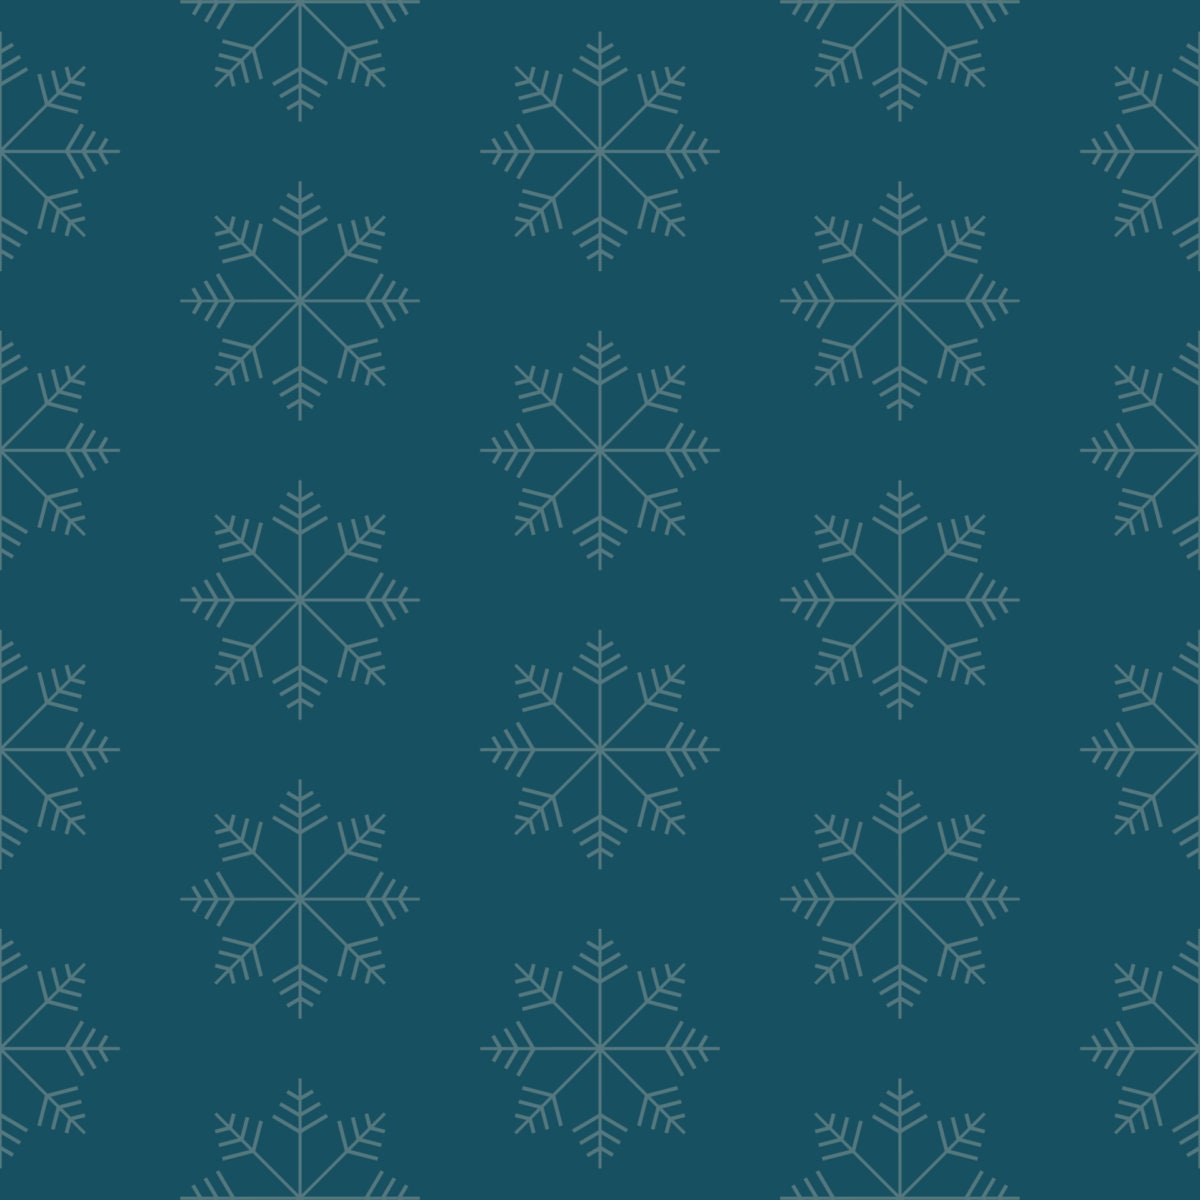 Holiday Patterns 2 XIX, Surface Design-Surface Design-The Design Craft